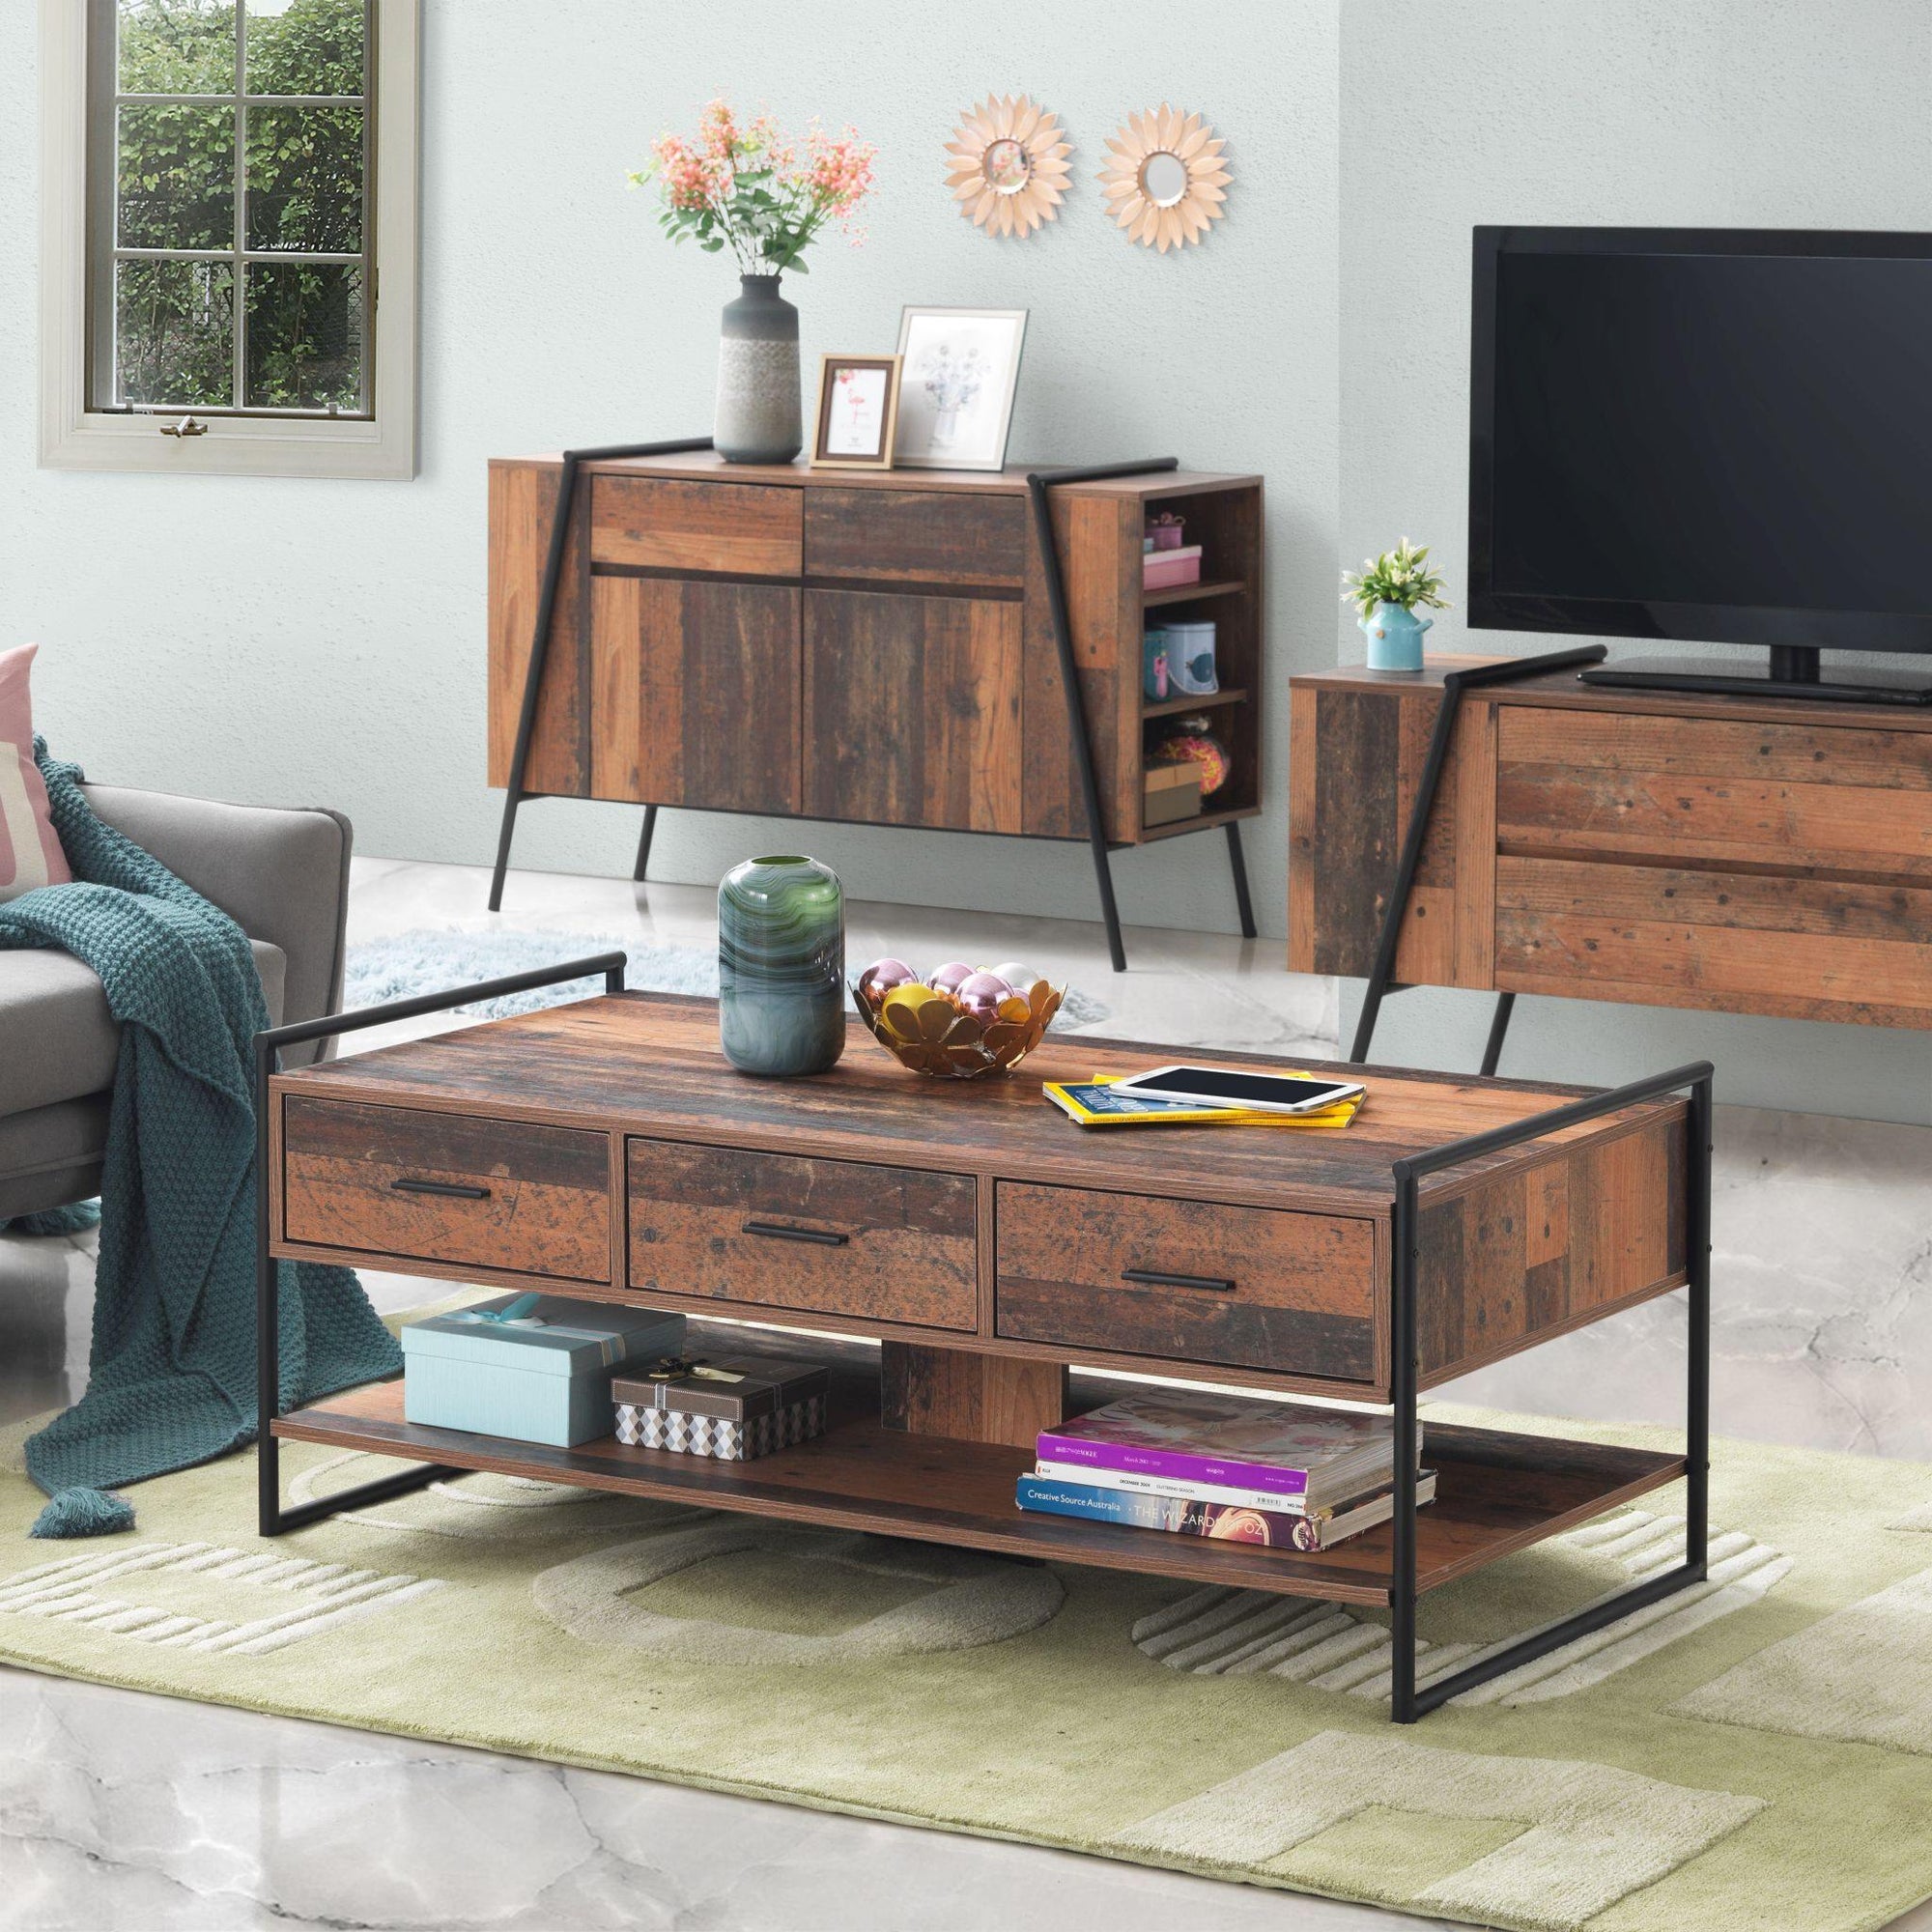 Abbey Coffee Table with 3 Drawers - Coffee Tables